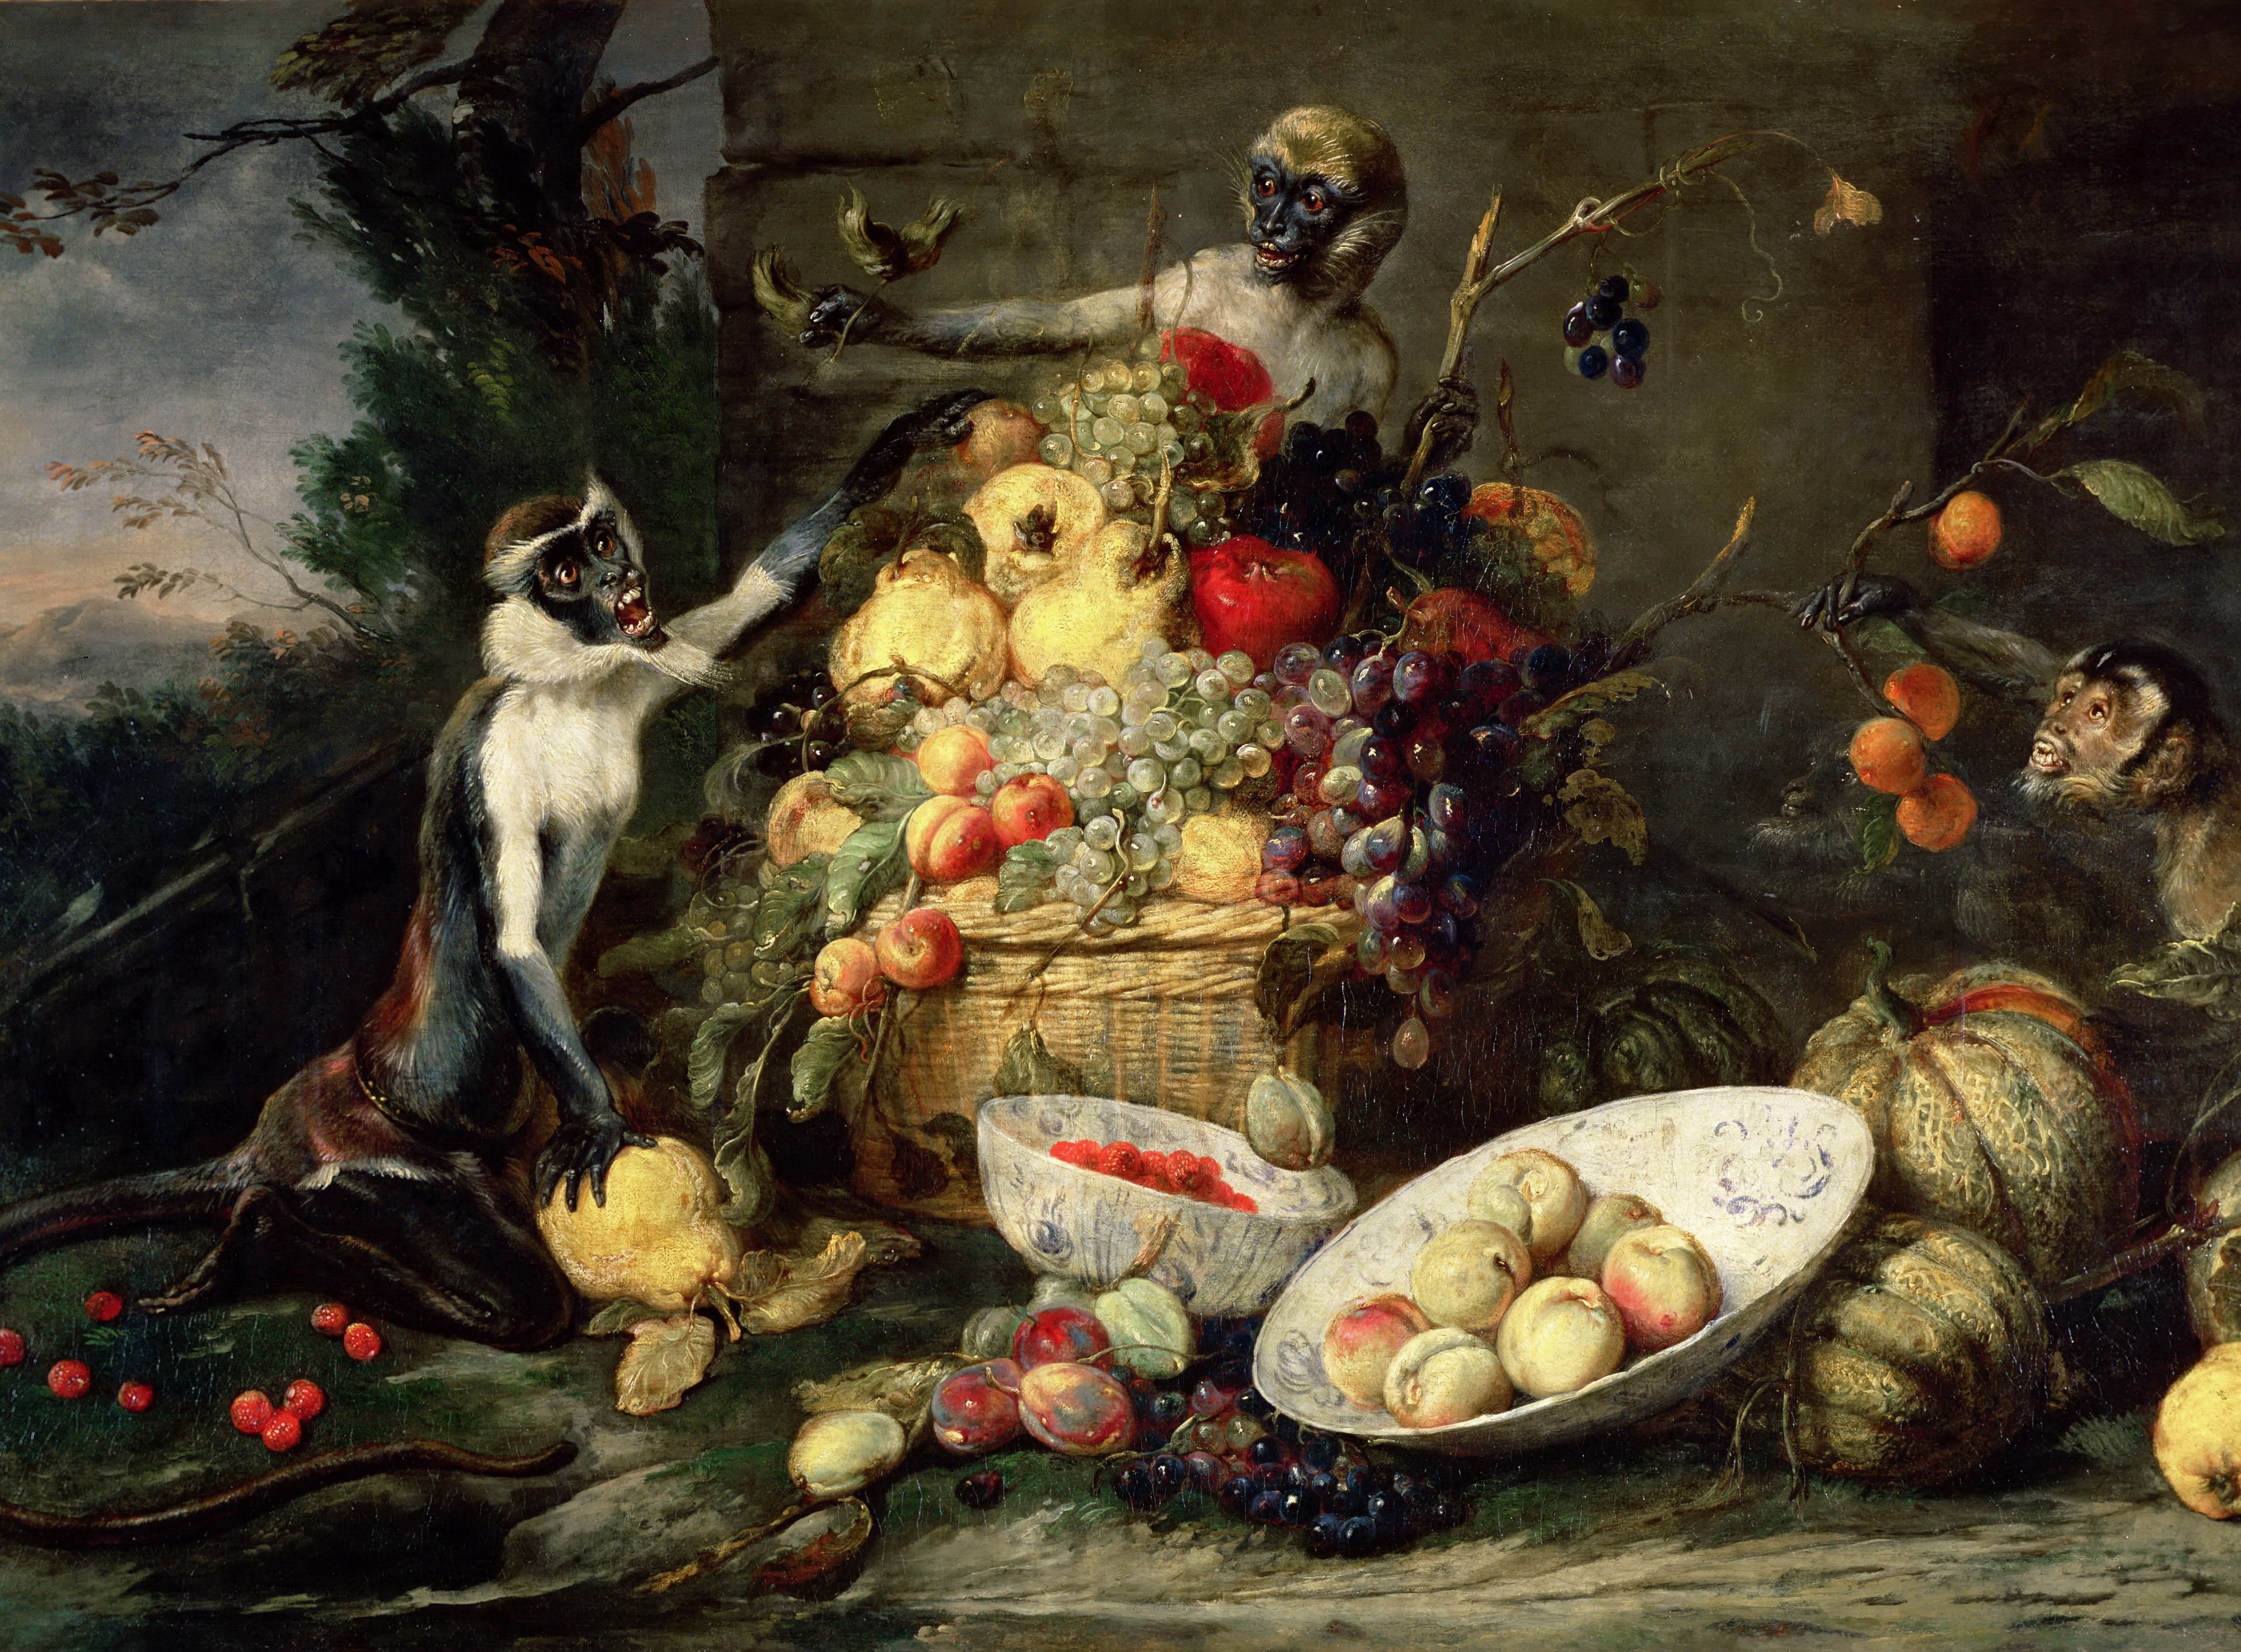 picture, art, frans sneijders, frans snyders, monkeys stealing fruits, monkeys stealing fruit, baroque, flanders